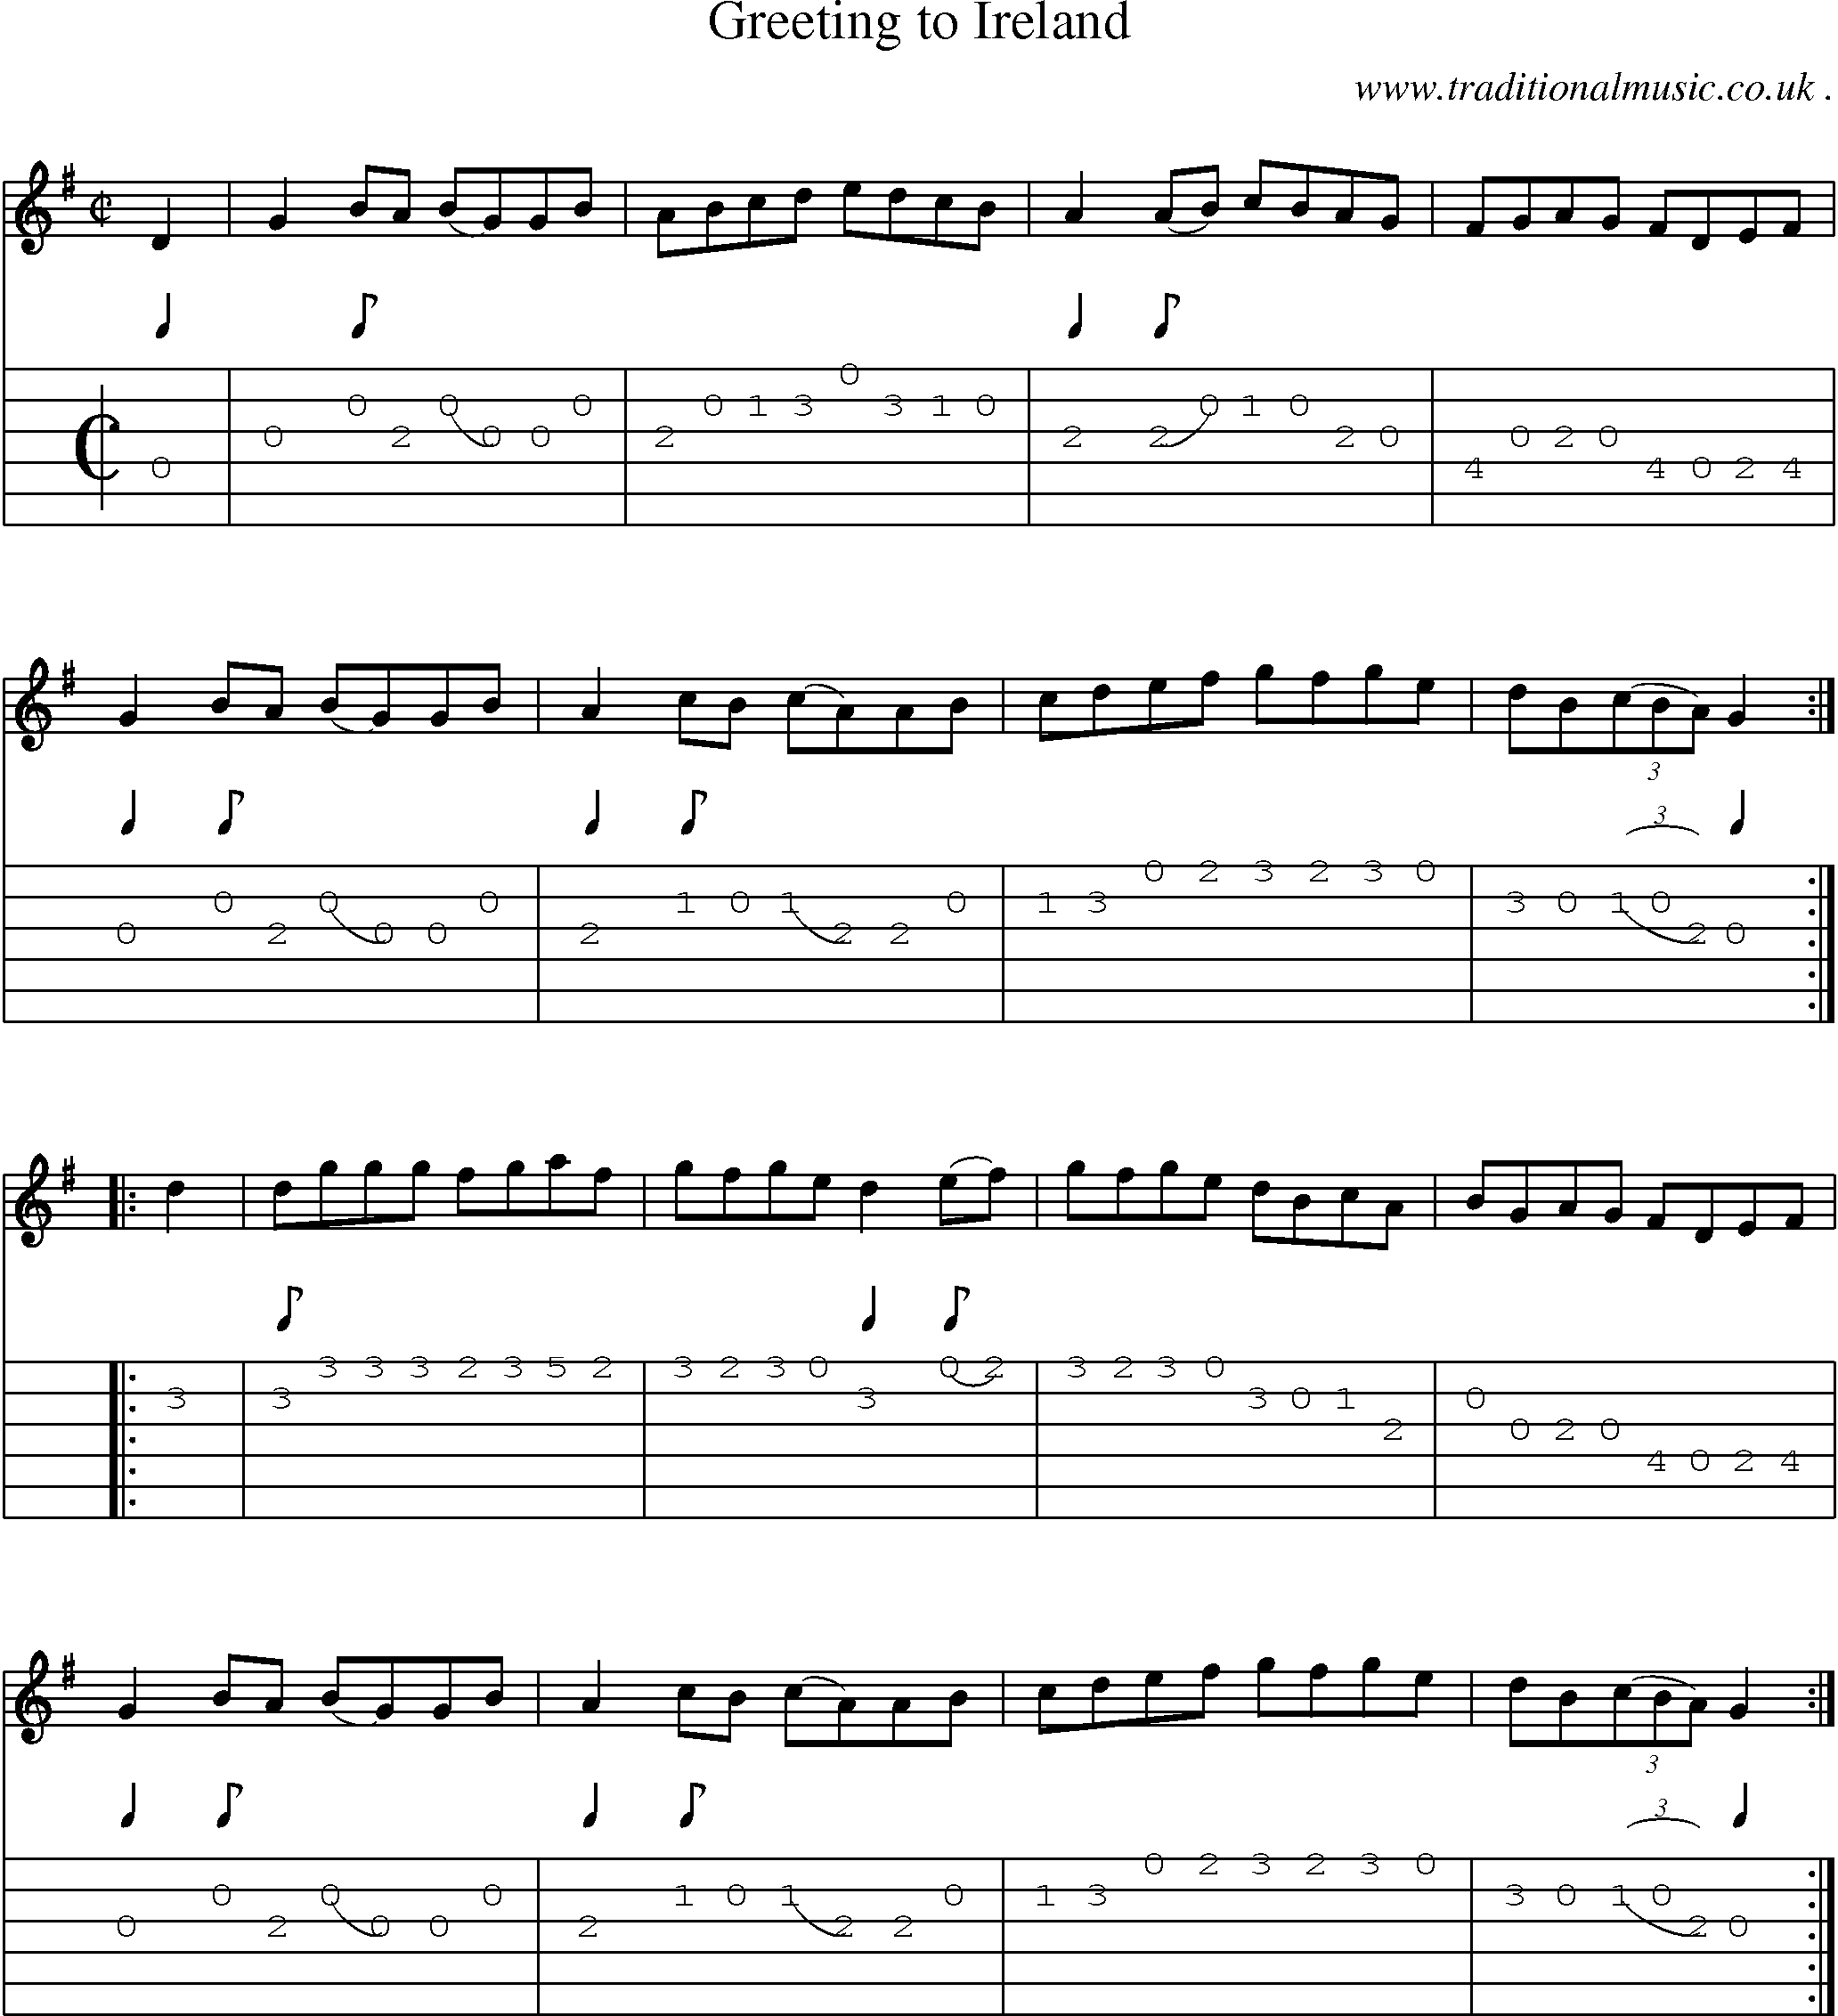 Sheet-Music and Guitar Tabs for Greeting To Ireland